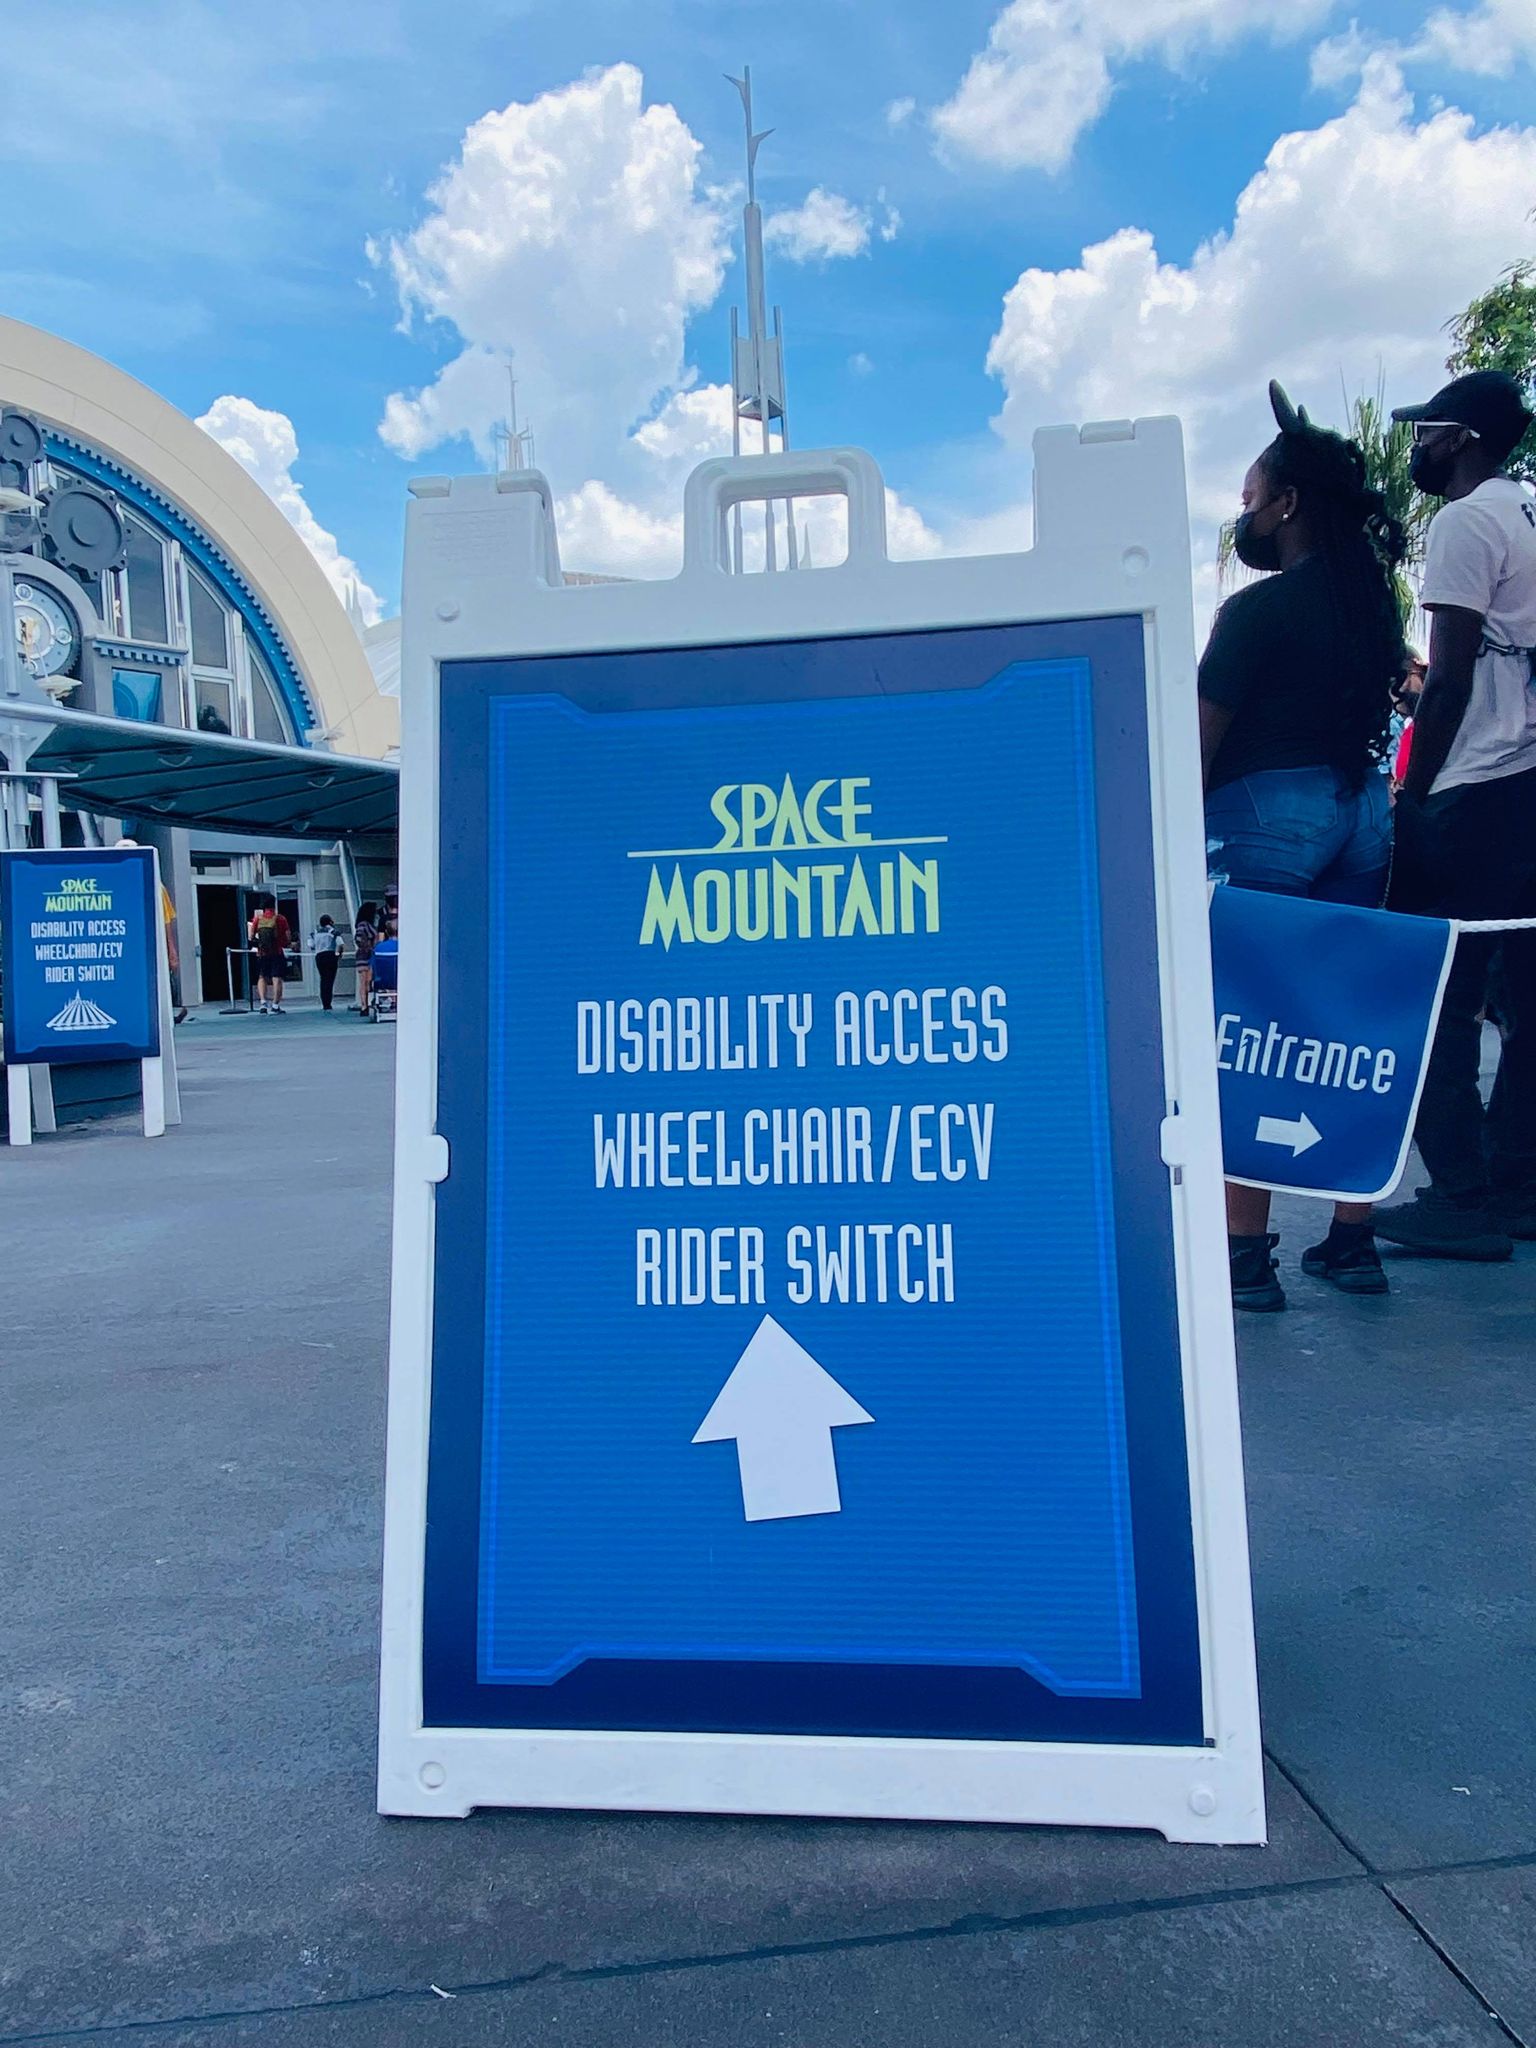 space mountain rider switch access pass